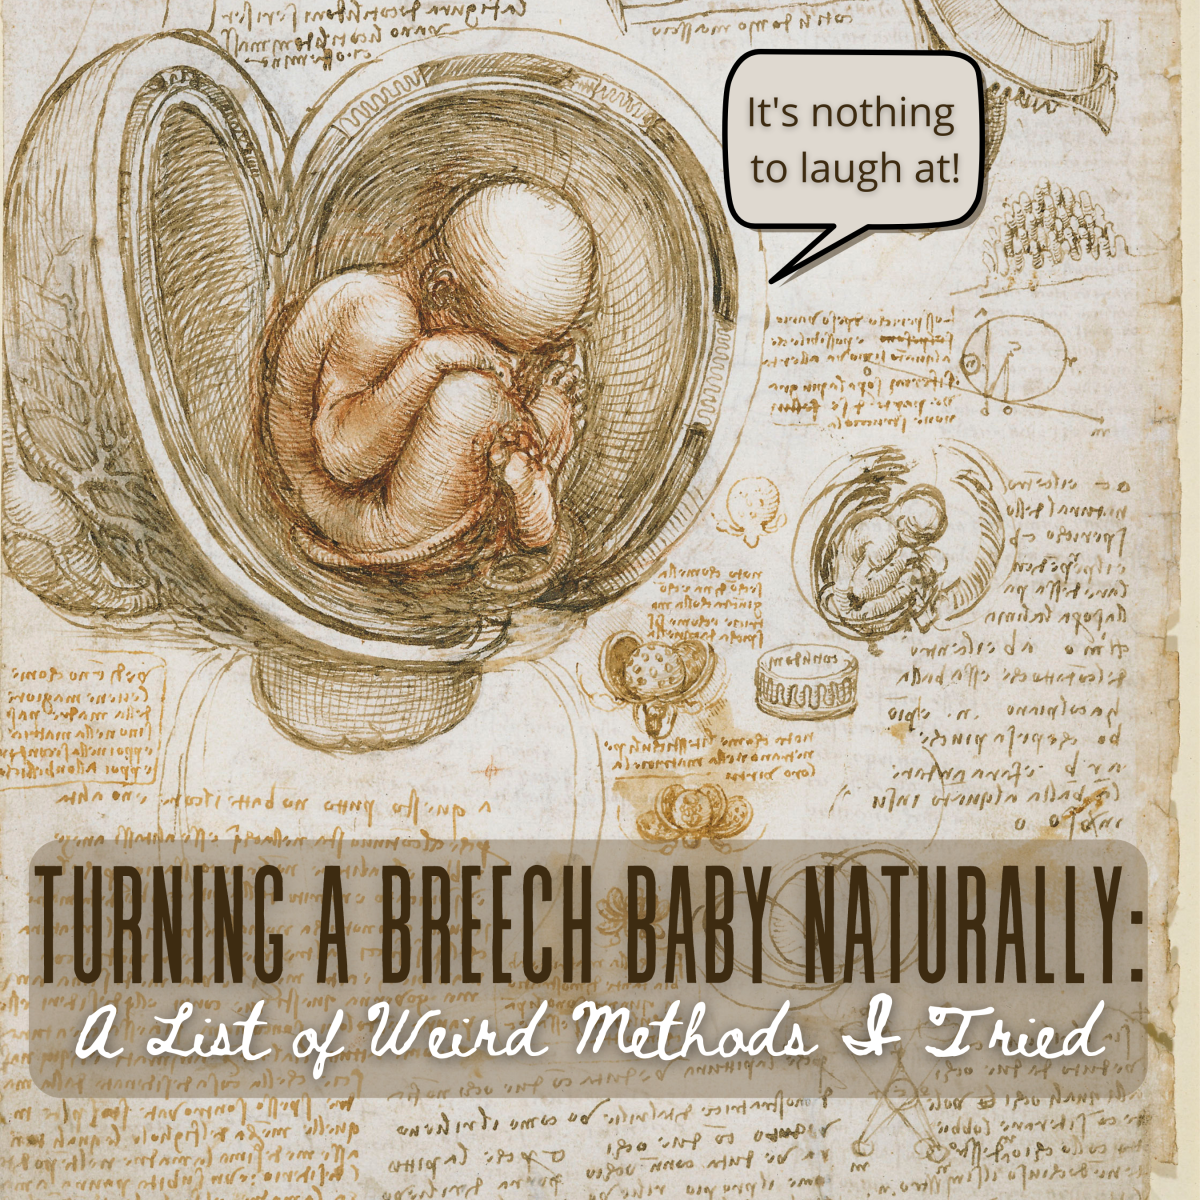 Weird Methods I Tried for Turning a Breech Baby Naturally